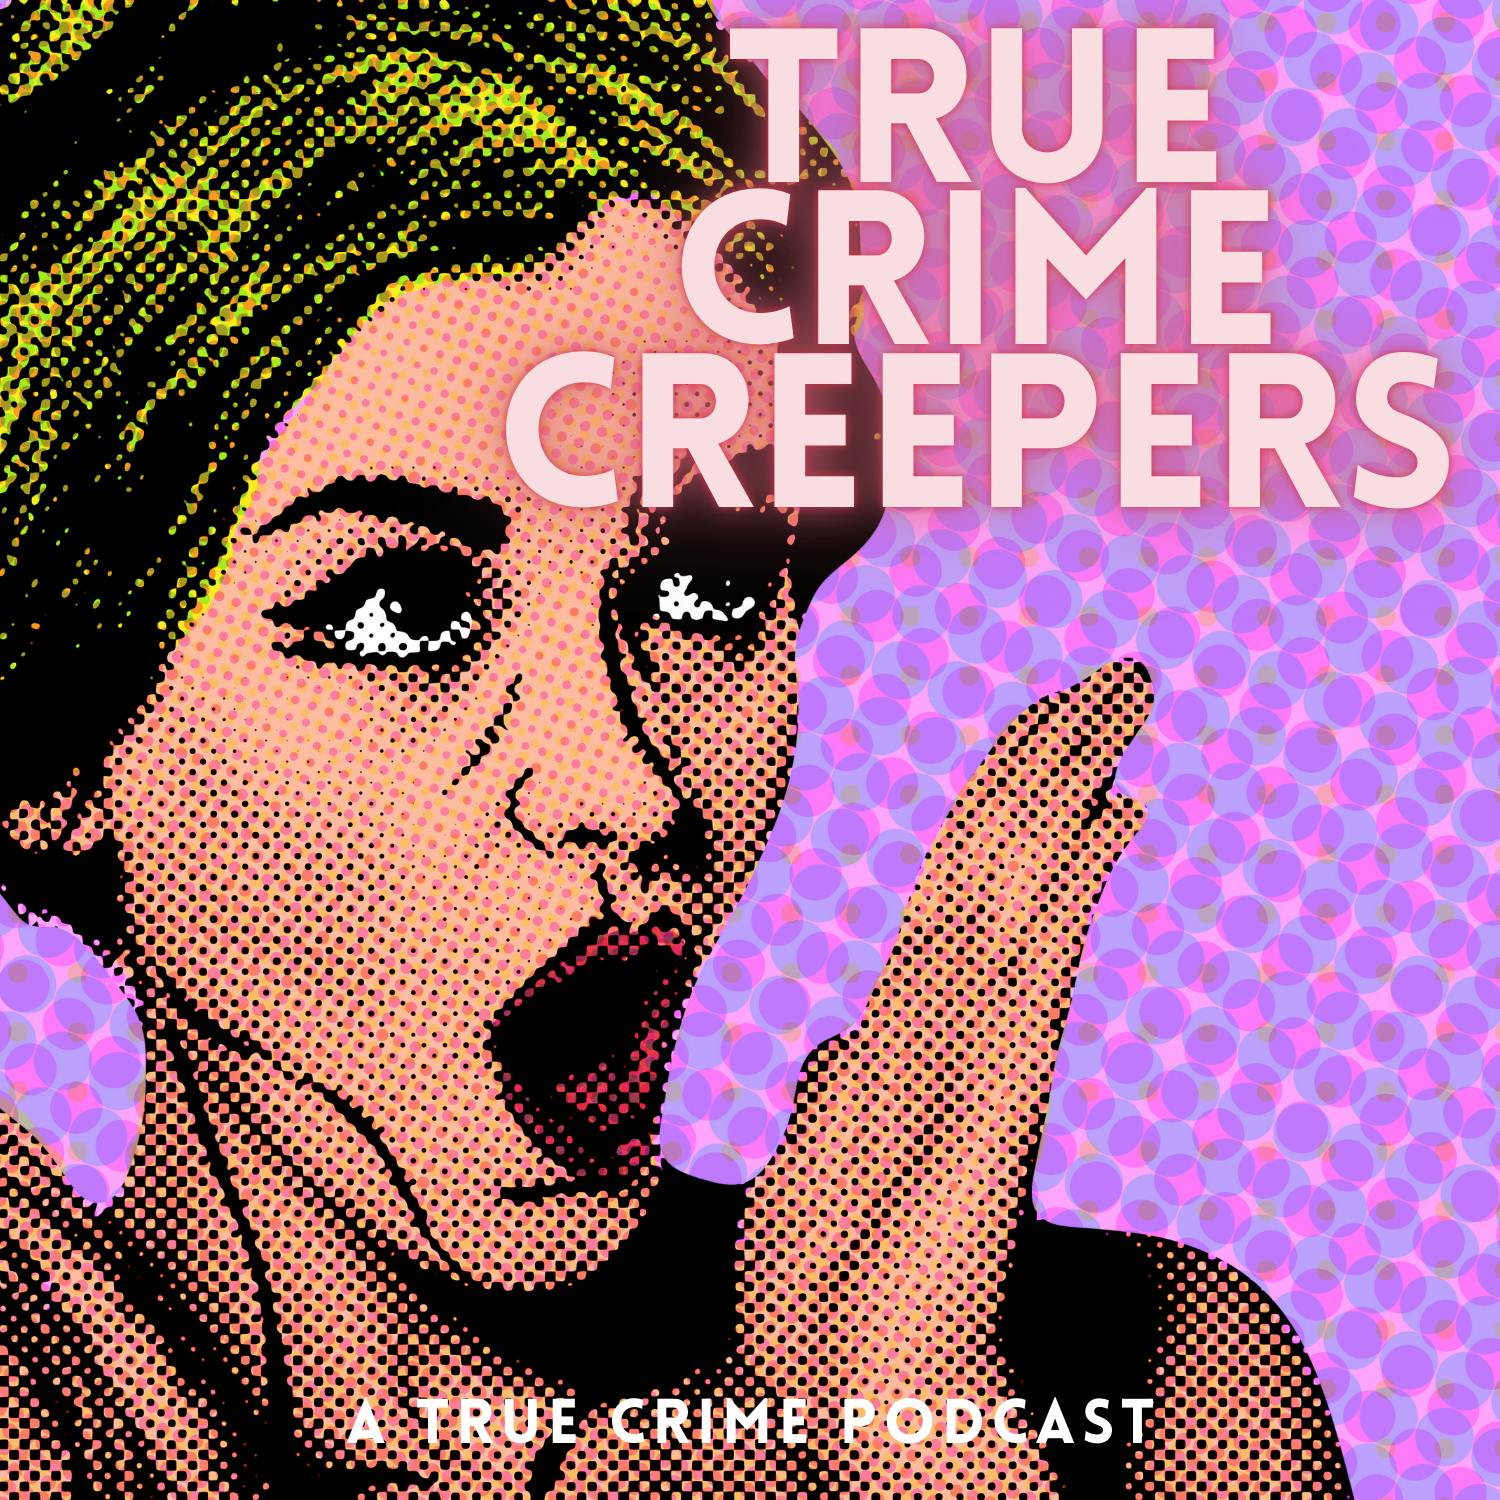 INTRODUCING: True Crime Creepers